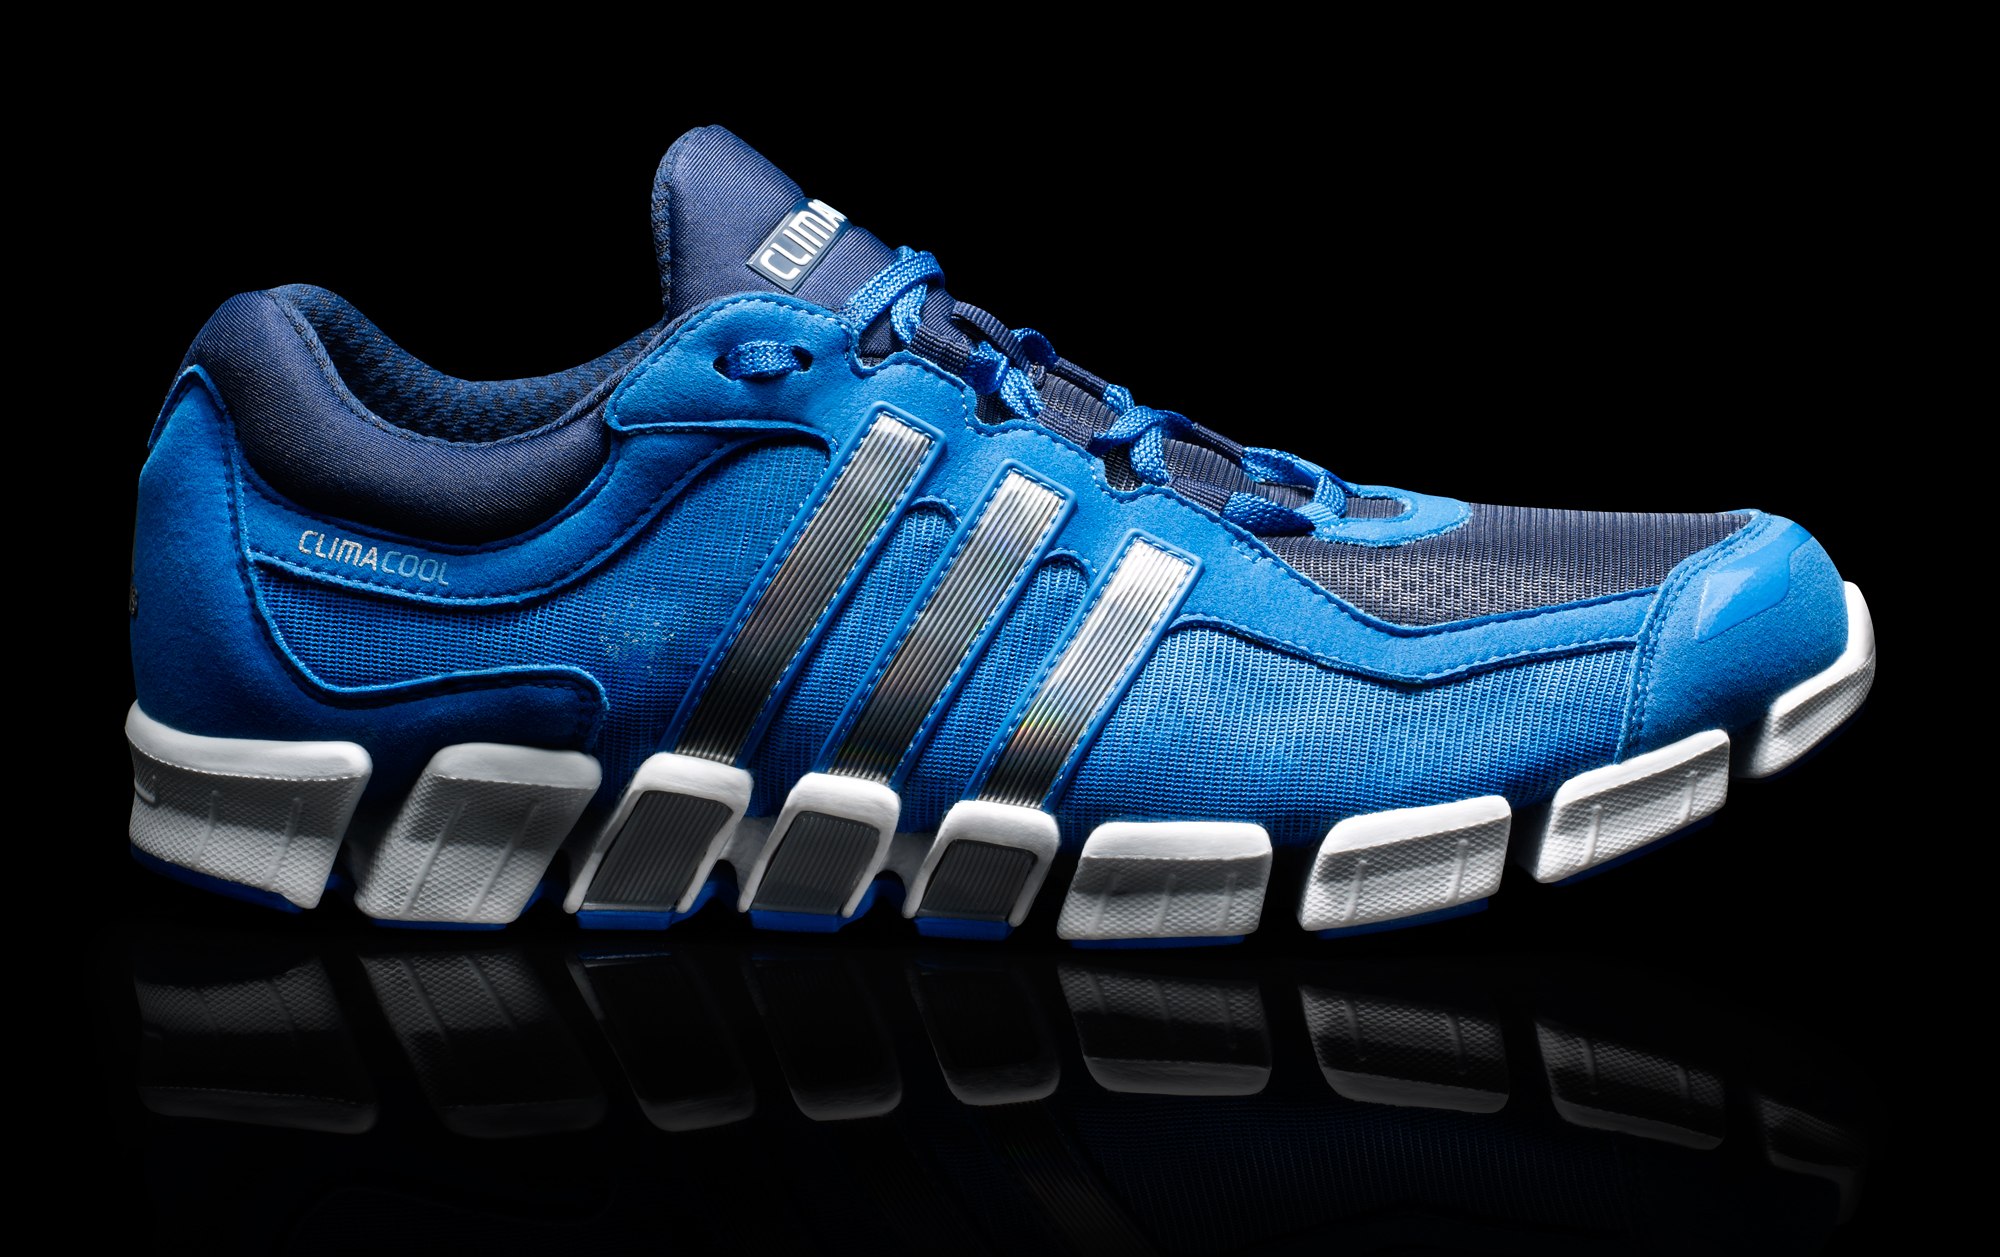 adidas Running on Twitter: "FIRST Climacool Fresh Ride in blue. #SweatNothing http://t.co/2rBZQXHq" / Twitter